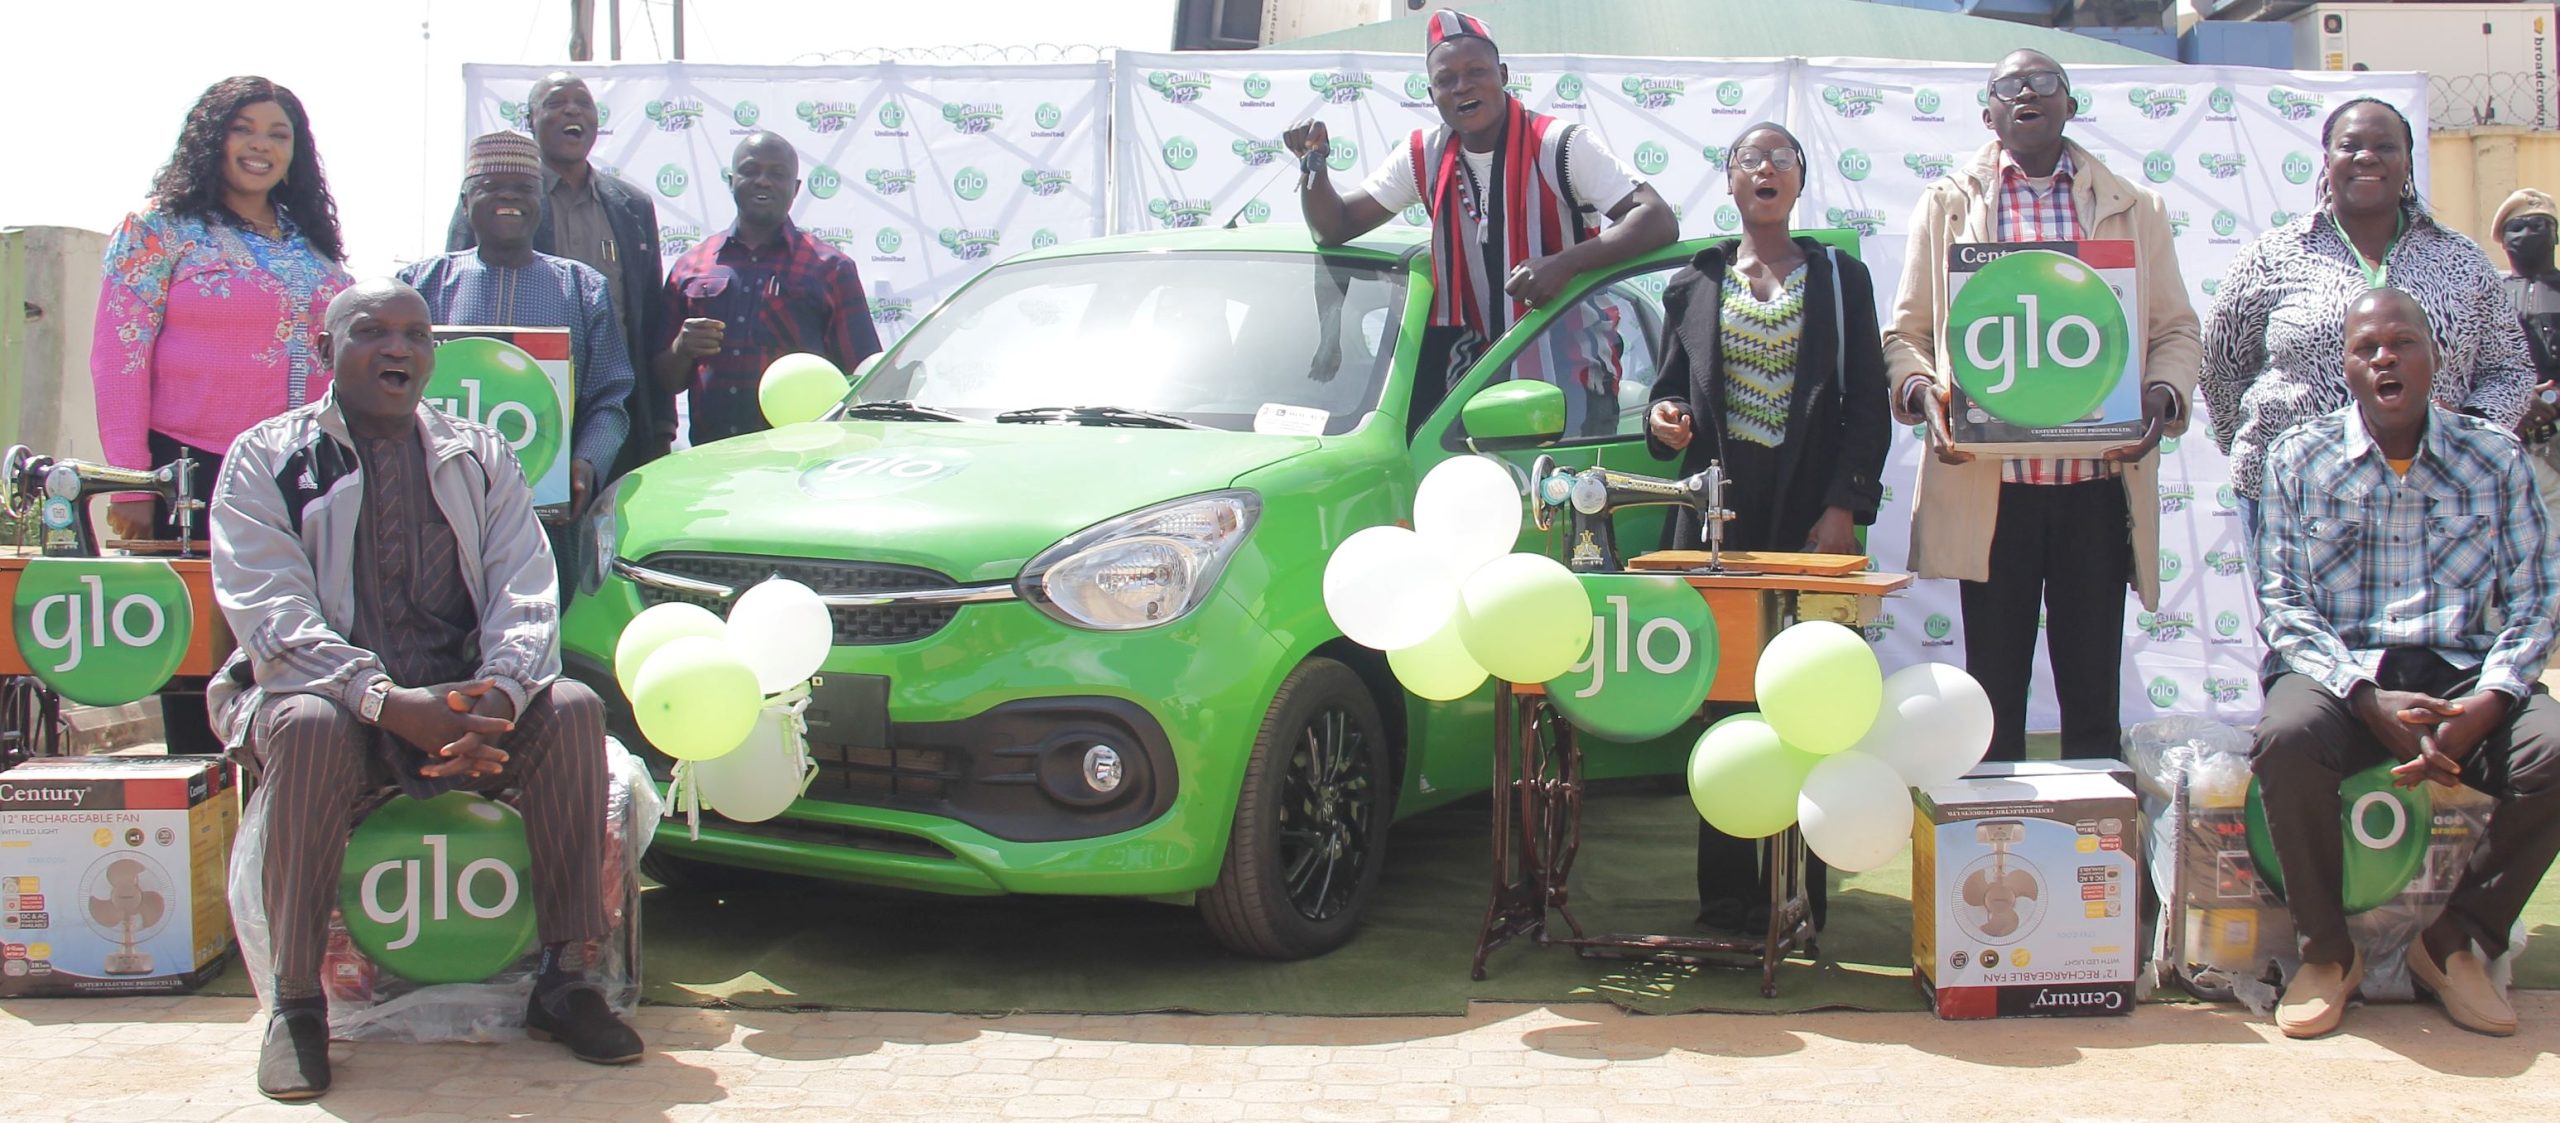 Glo presents car, other prizes to Festival of Joy promo winners in Jos